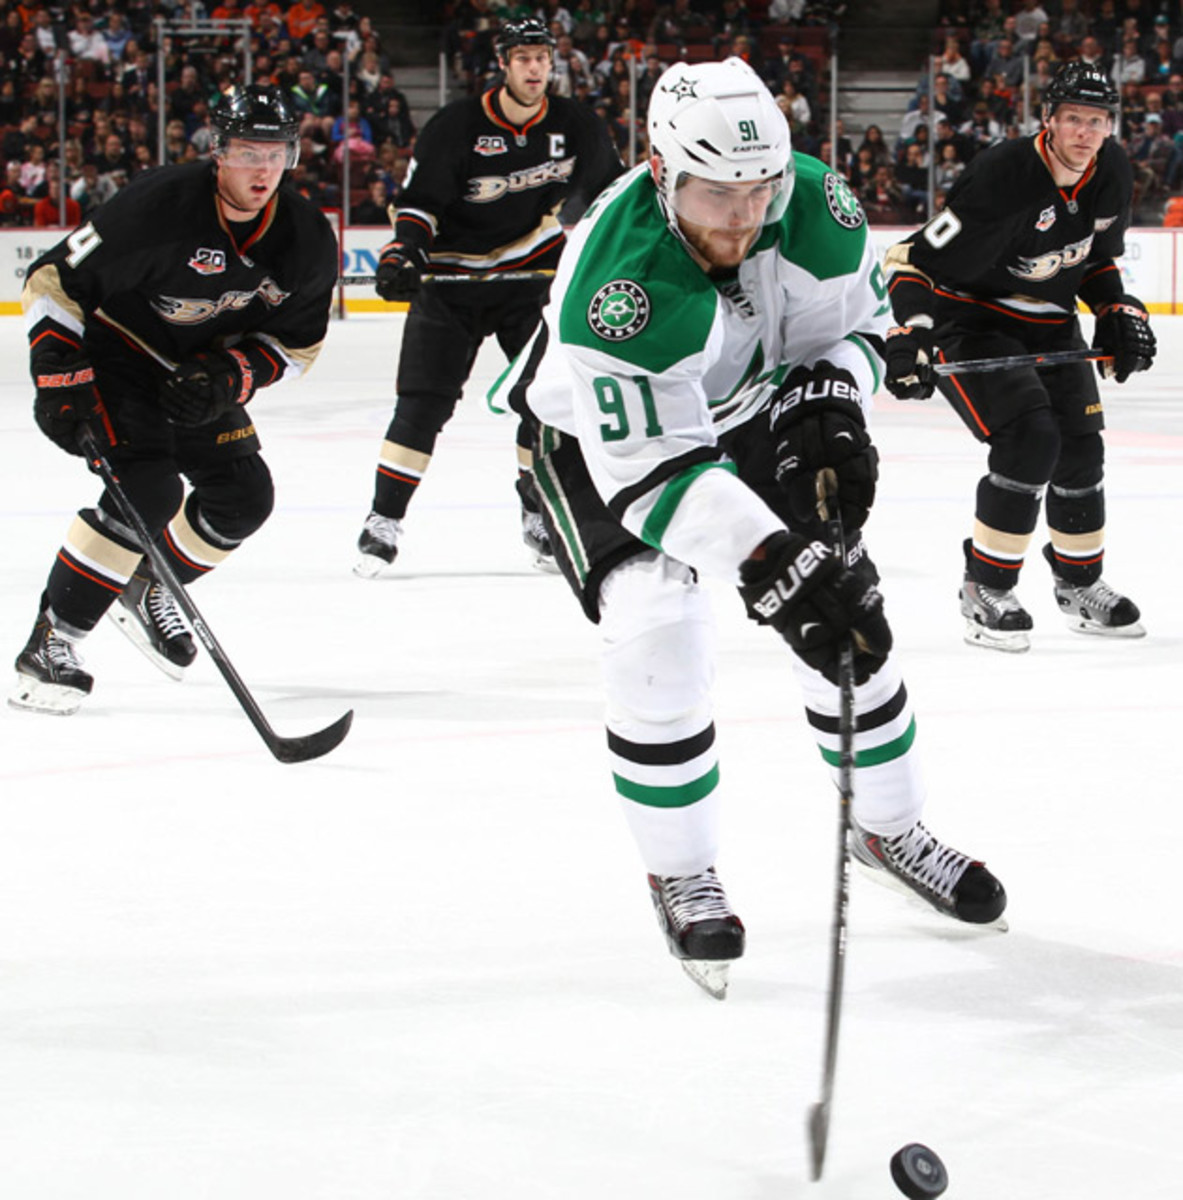 Drafted in 2010 by the Boston Bruins, center Tyler Seguin has a meticulous workout that produces results you can see in his psychical play on the ice for his current team, the Dallas Stars. 